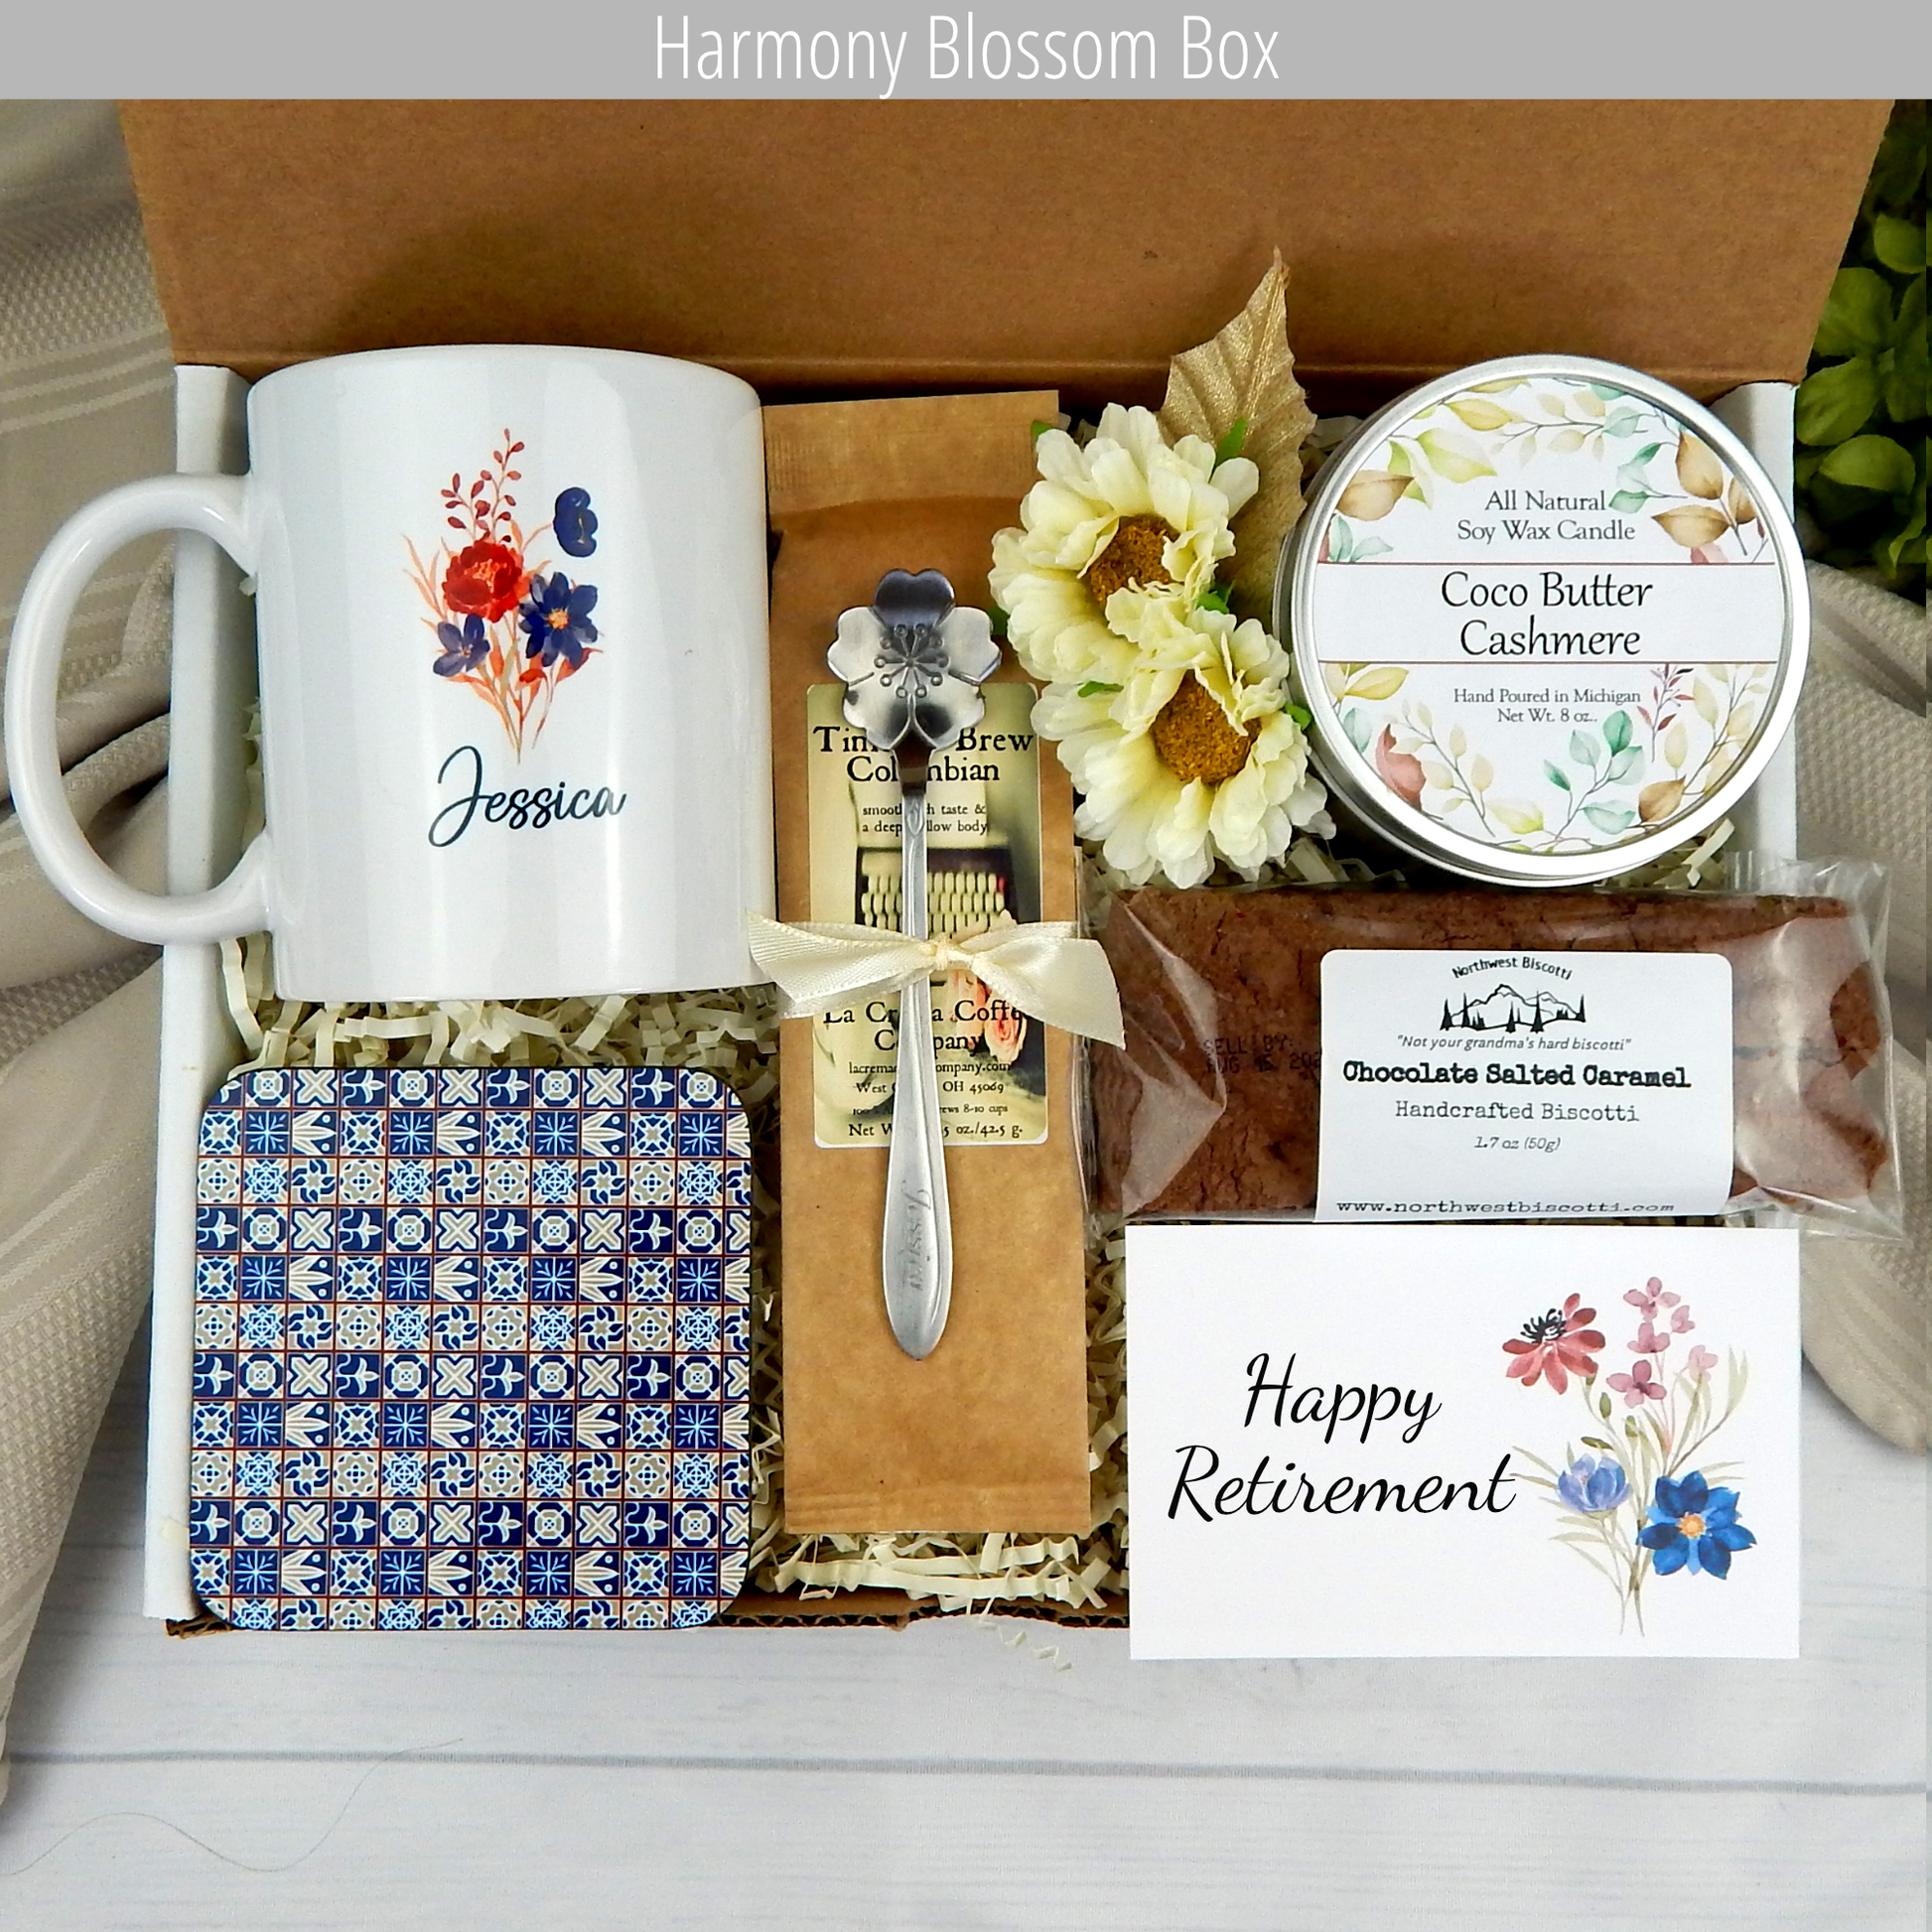 Relaxation and rejuvenation: Retirement gift basket with a custom mug, coffee, and delectable treats to inspire.